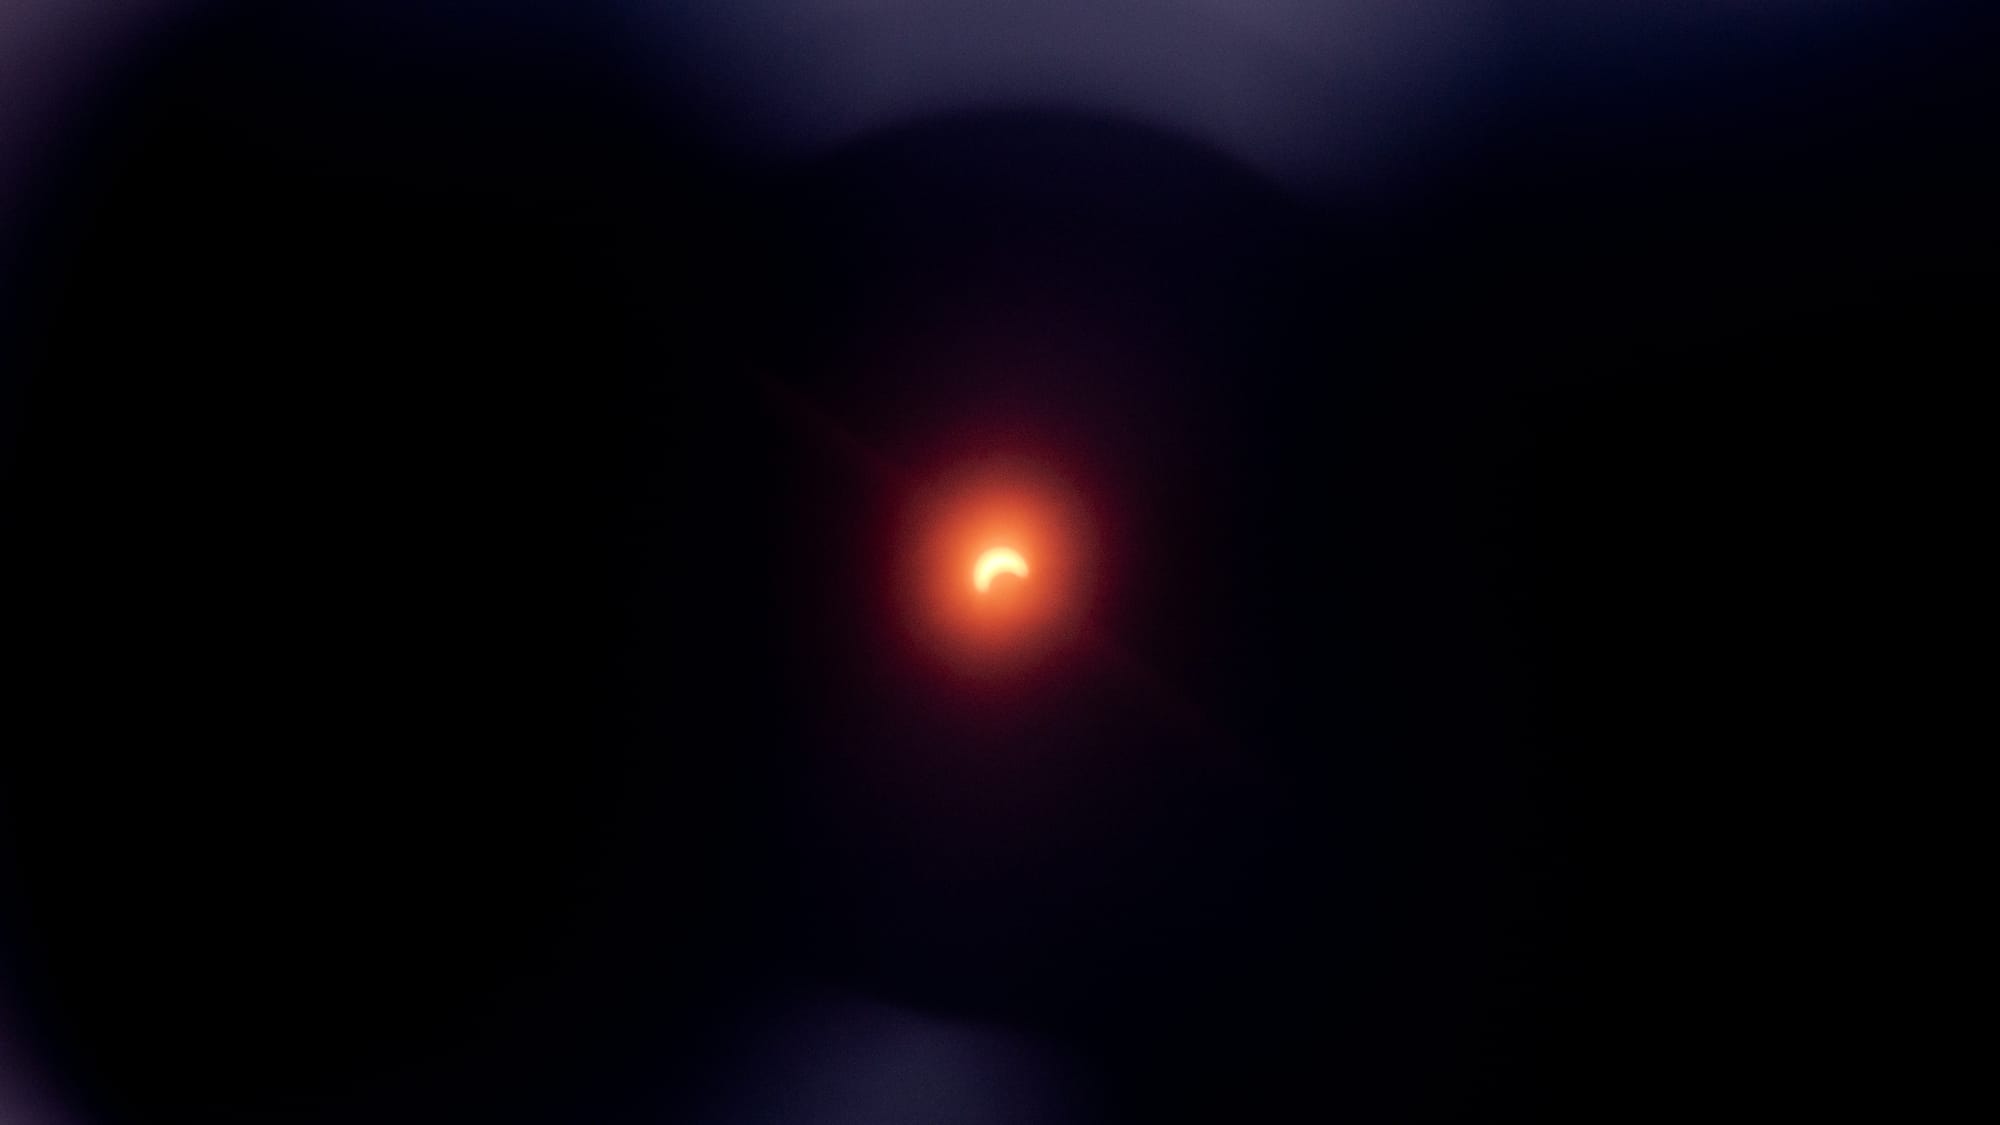 The 2024 solar eclipse, photographed in the Chicago area. About half of the sun is obscured by the moon as an orange glow emanates against the dark backdrop.